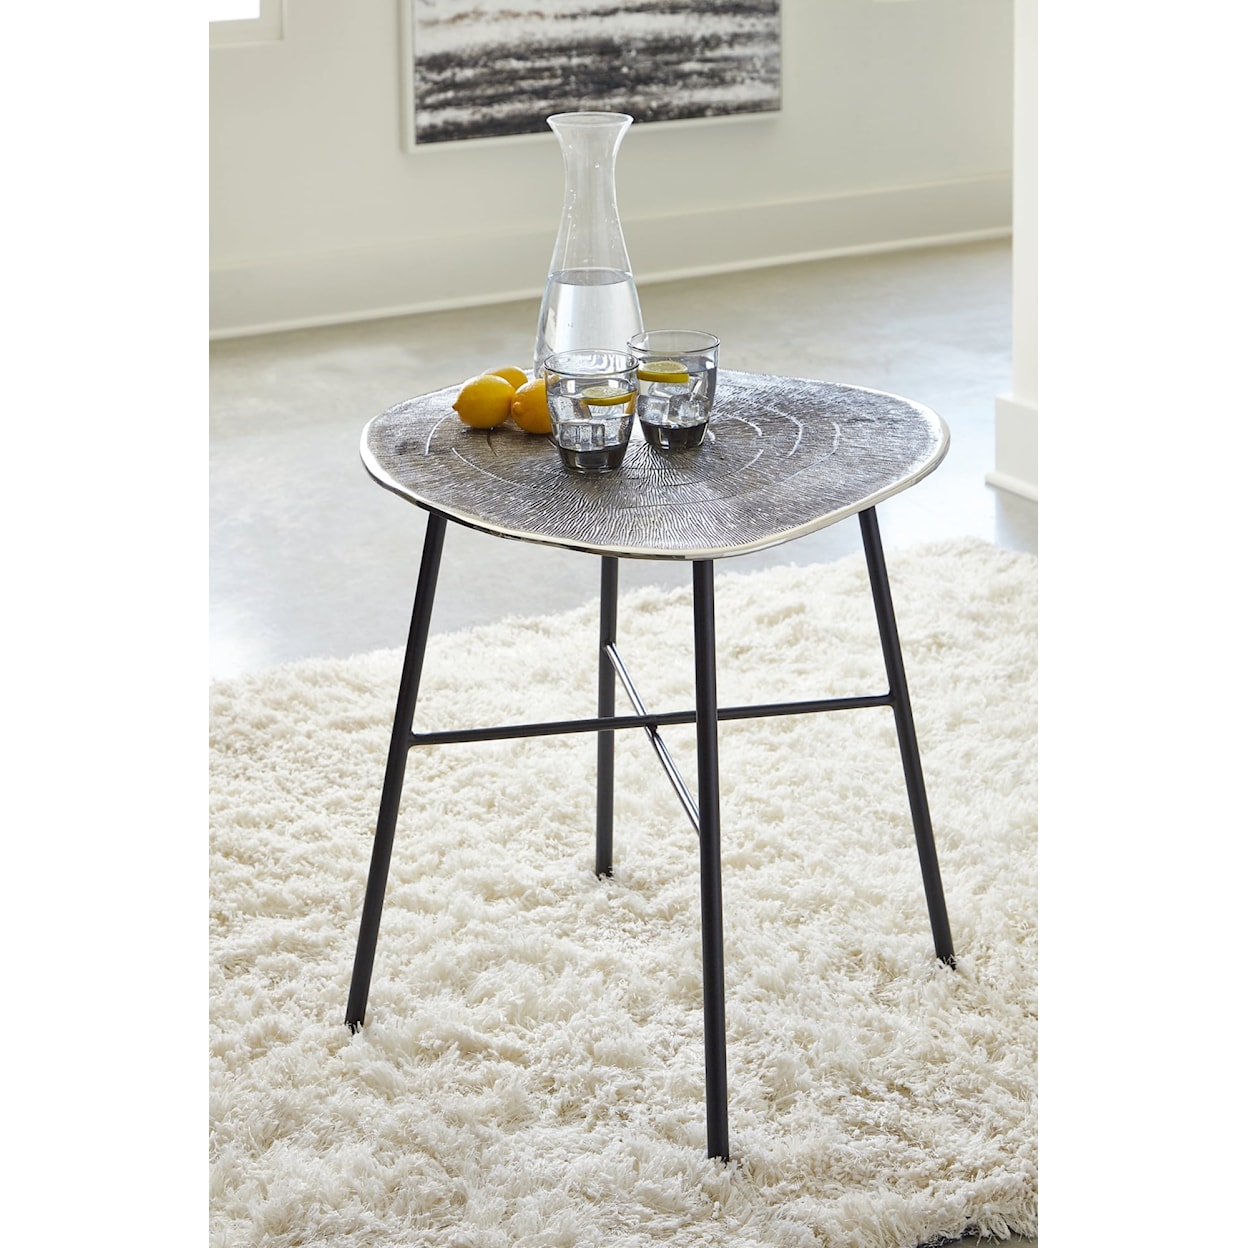 Signature Design by Ashley Laverford Round End Table